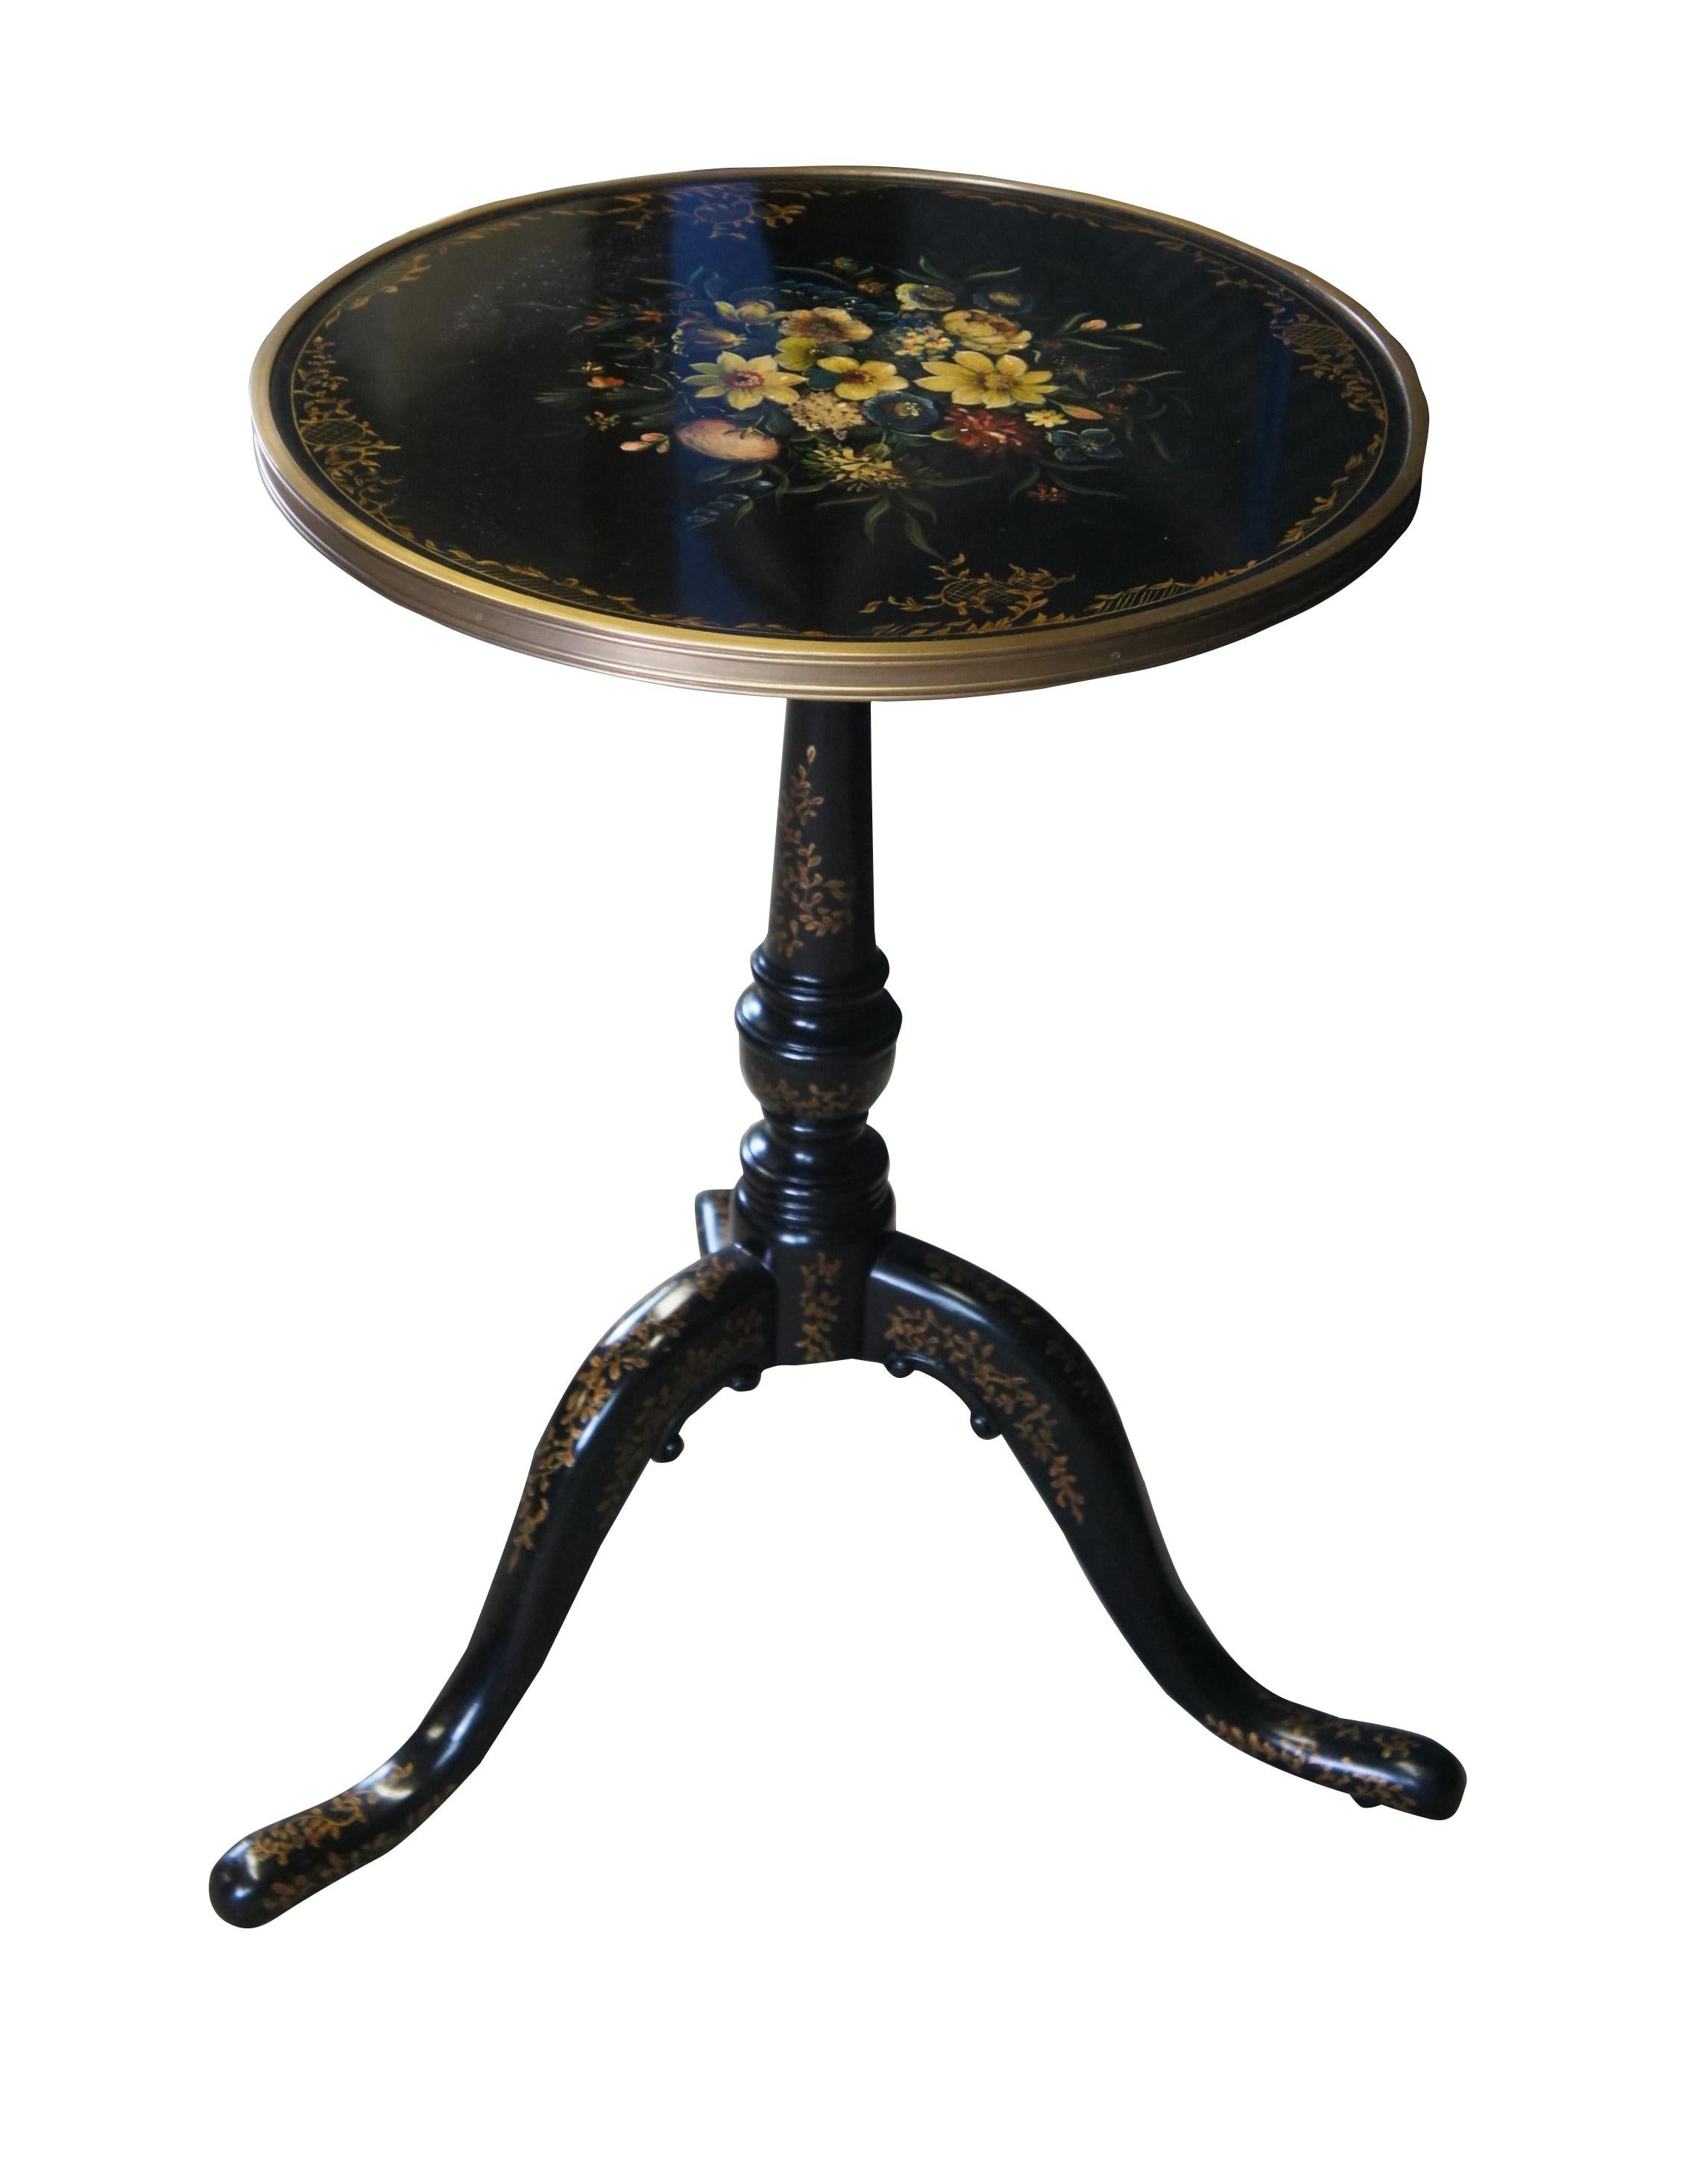 Chinoiserie Theodore Alexander Black Lacquer Ebonized Gilt Tripod Pedestal Round Side Table For Sale